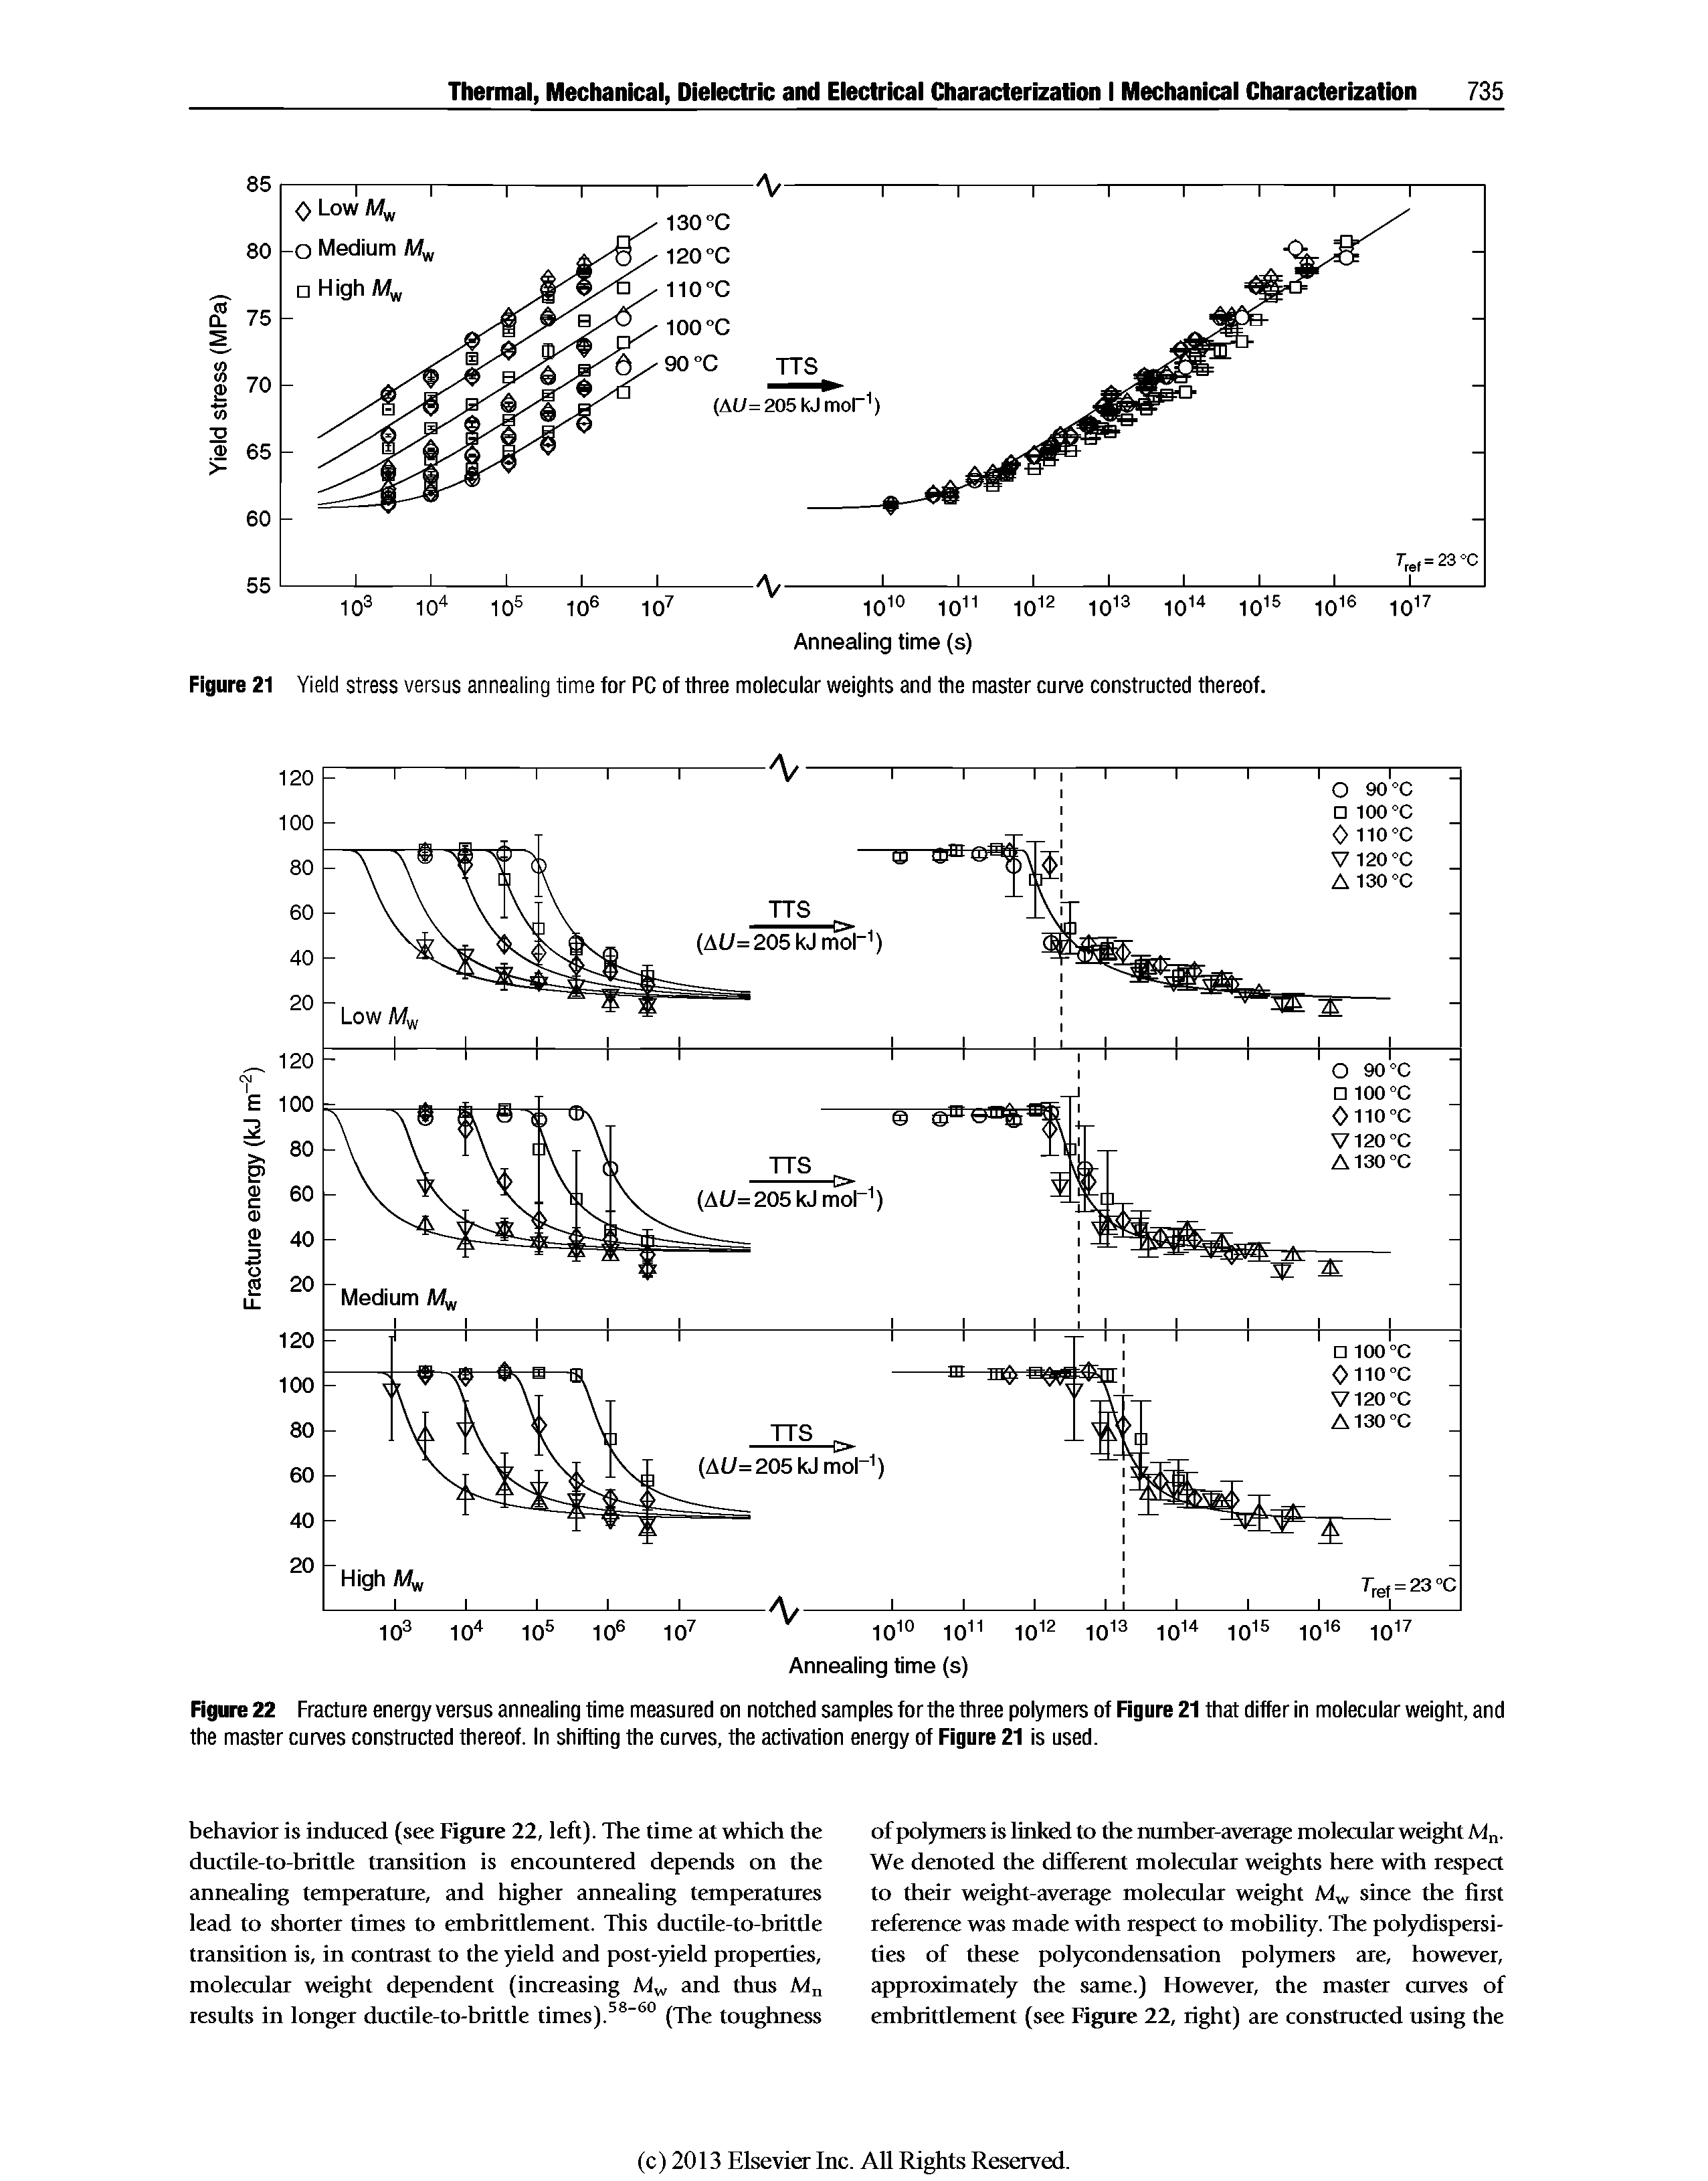 Figure 22 Fracture energy versus annealing time measured on notched samples forthe three polymers of Figure 21 that differ in molecular weight, and the master curves constructed thereof. In shifting the curves, the activation energy of Figure 21 is used.